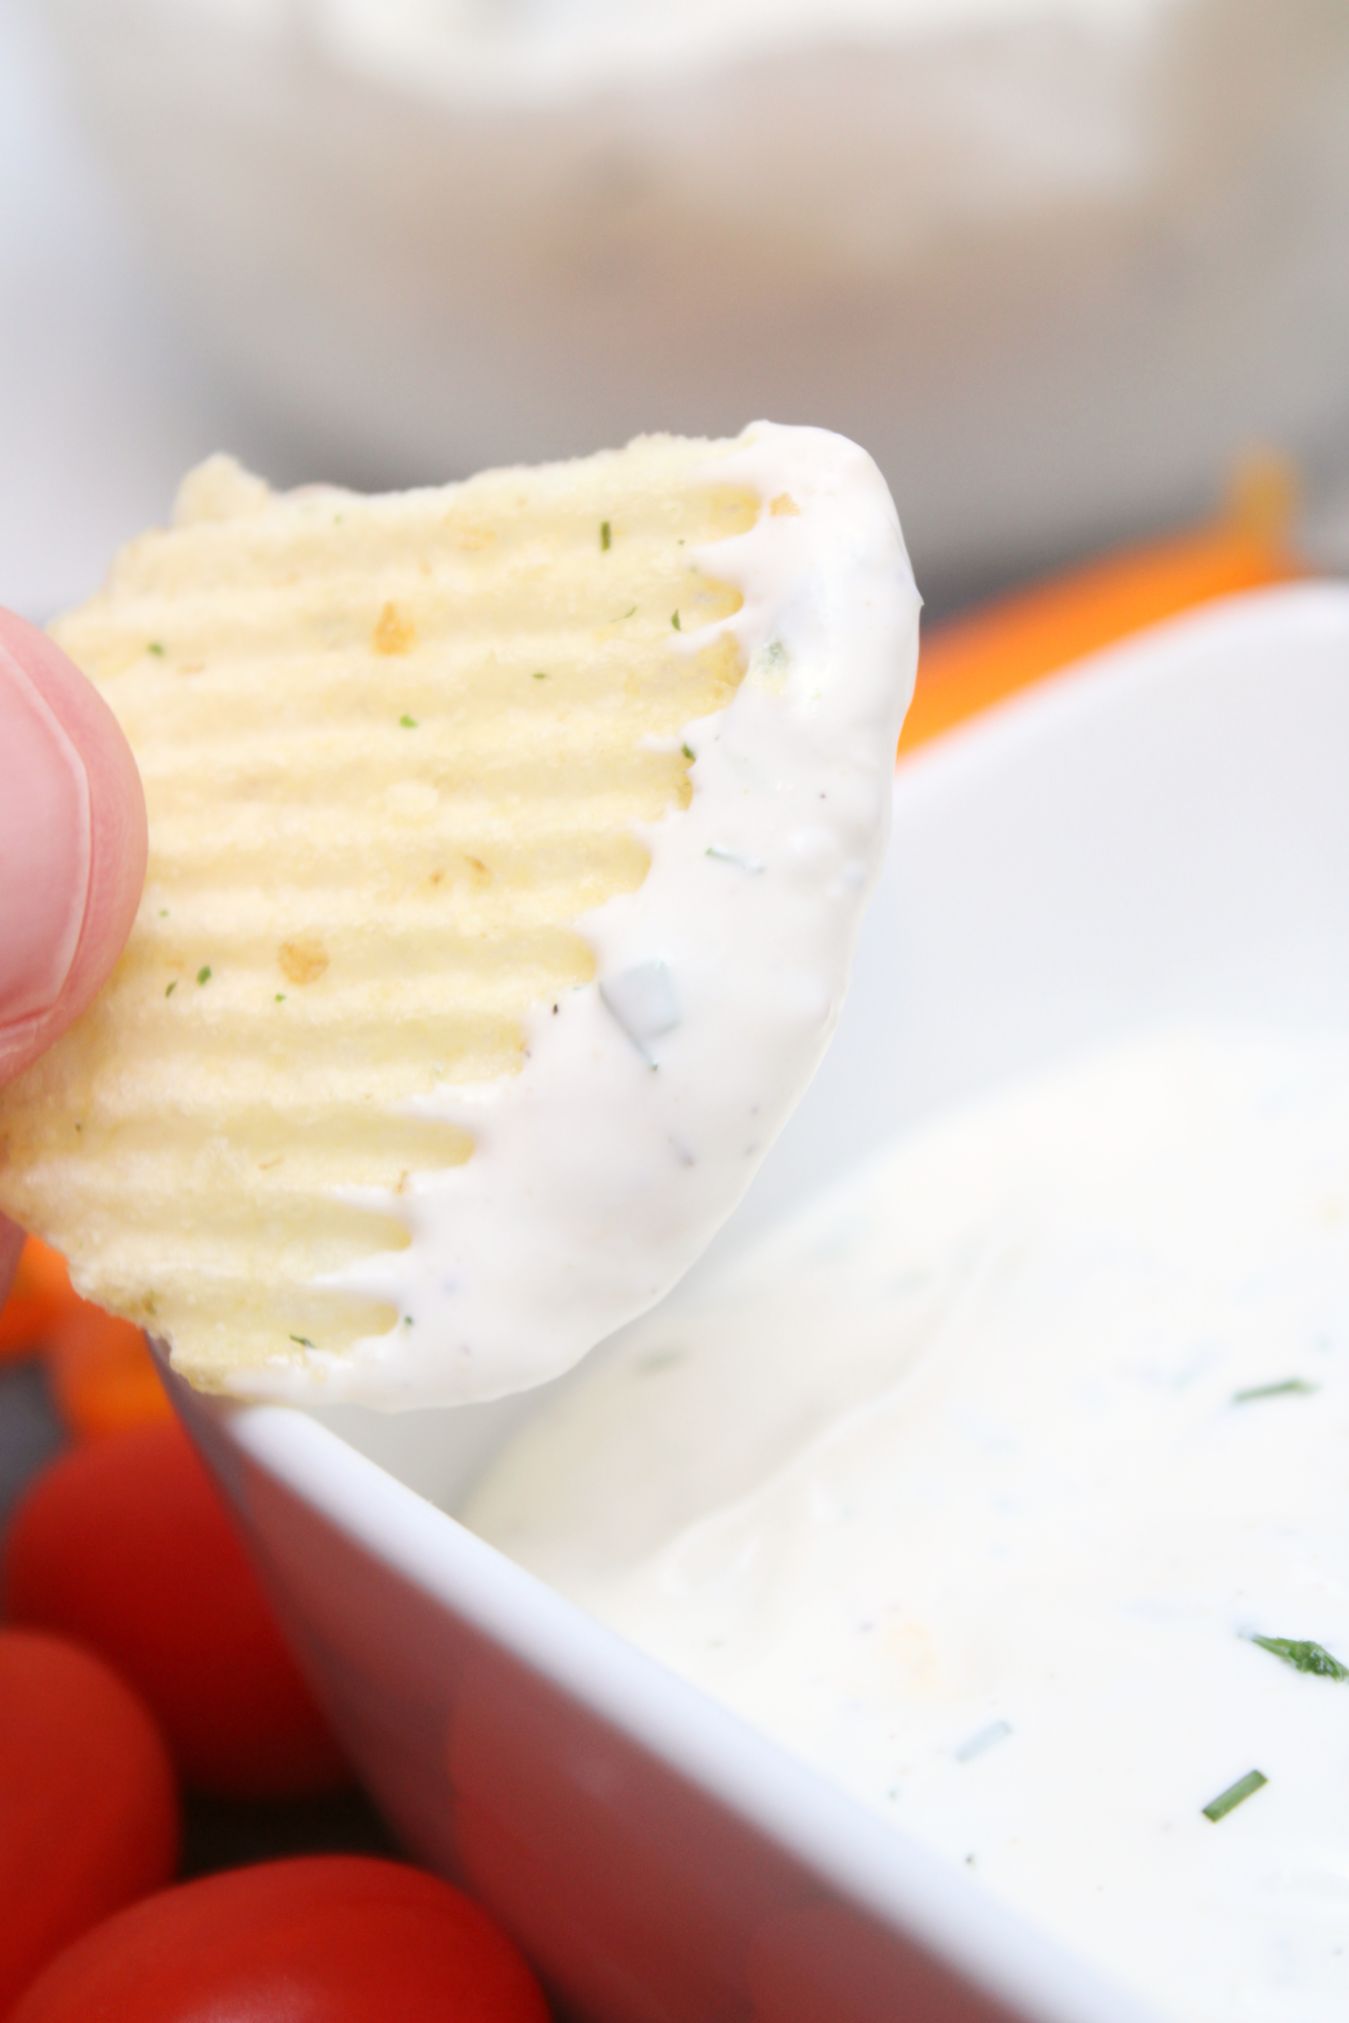 A chip being dipped into a white dip topped with fresh herbs